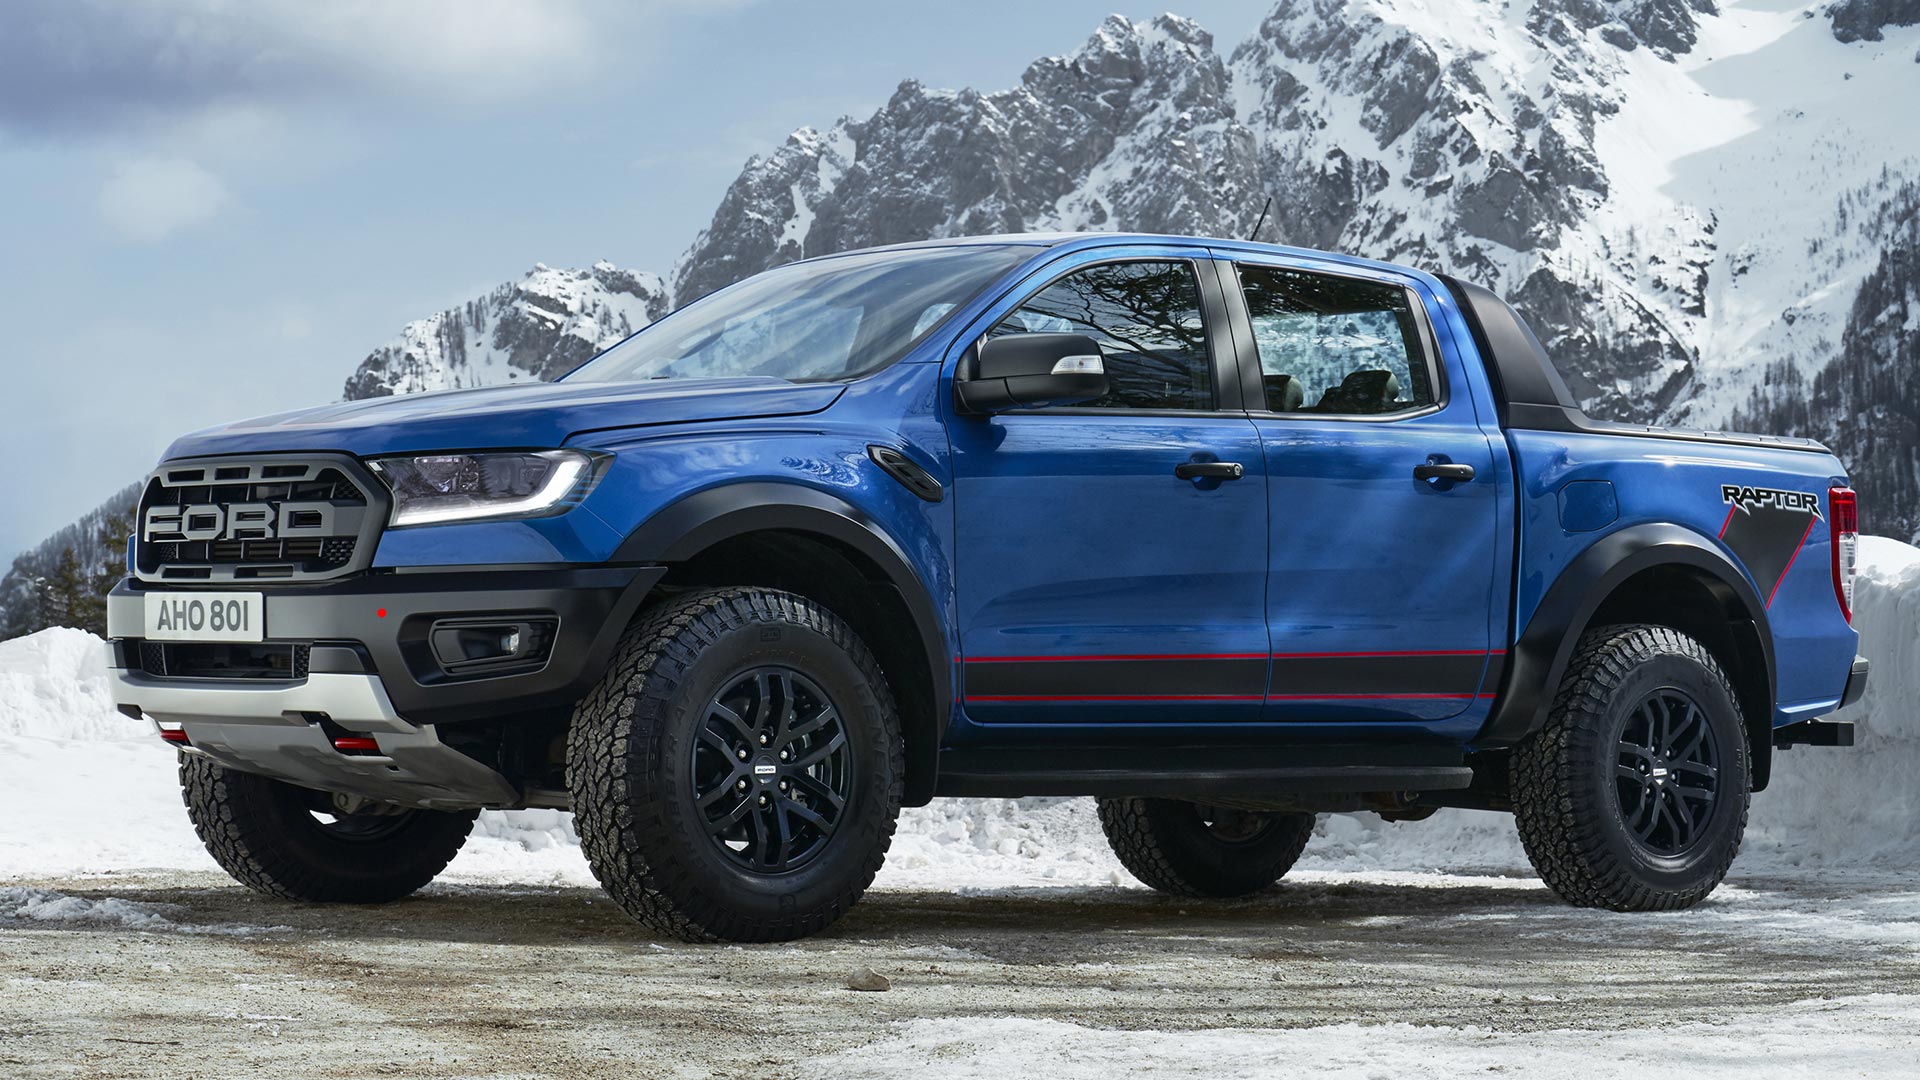 Ford Offers Special Ownership Package For The Ranger Raptor This July ...